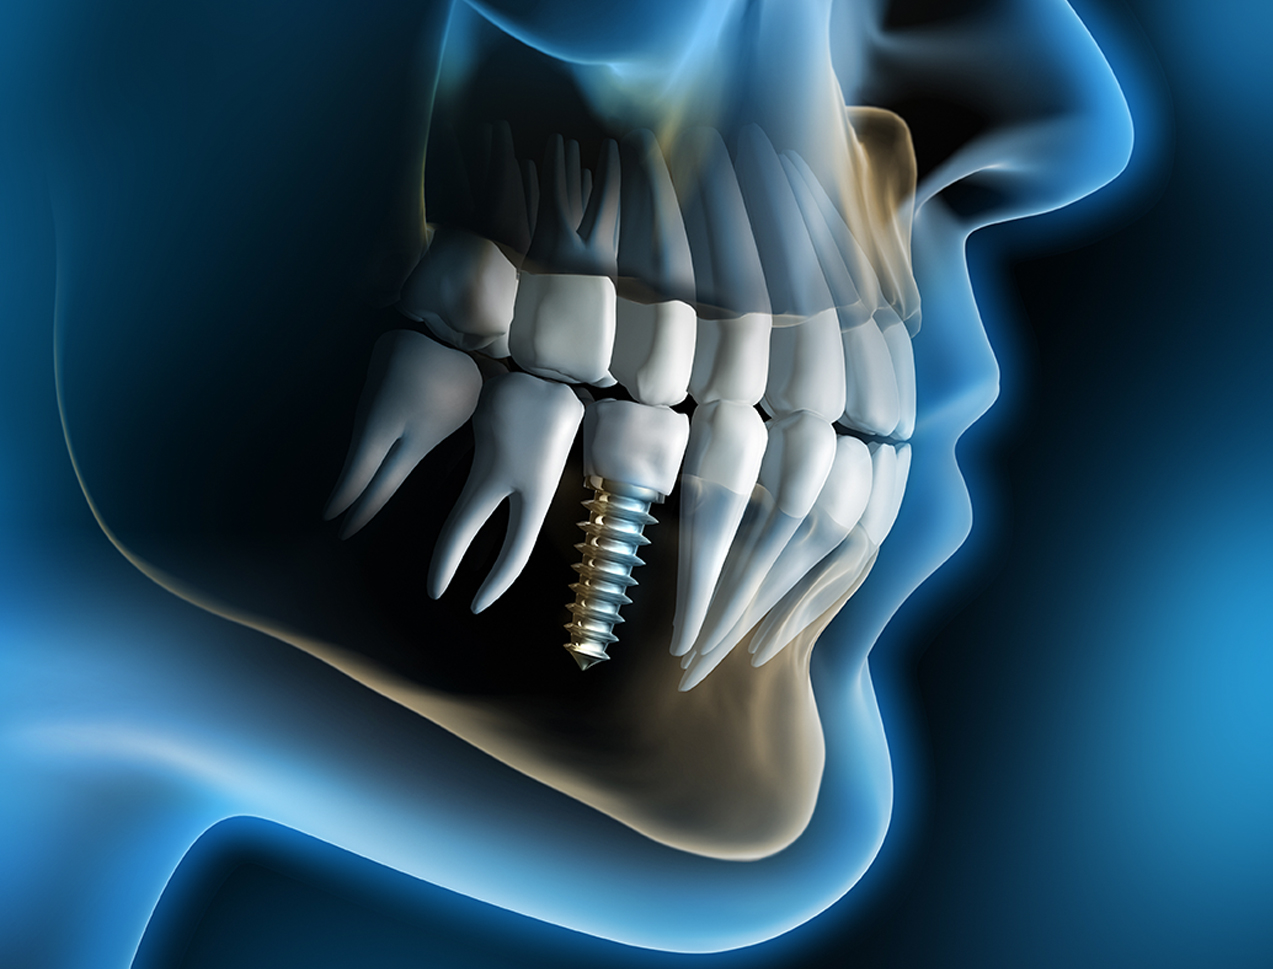 Dental Implants And Prosthetics - Dental Implant And Prosthetic , HD Wallpaper & Backgrounds